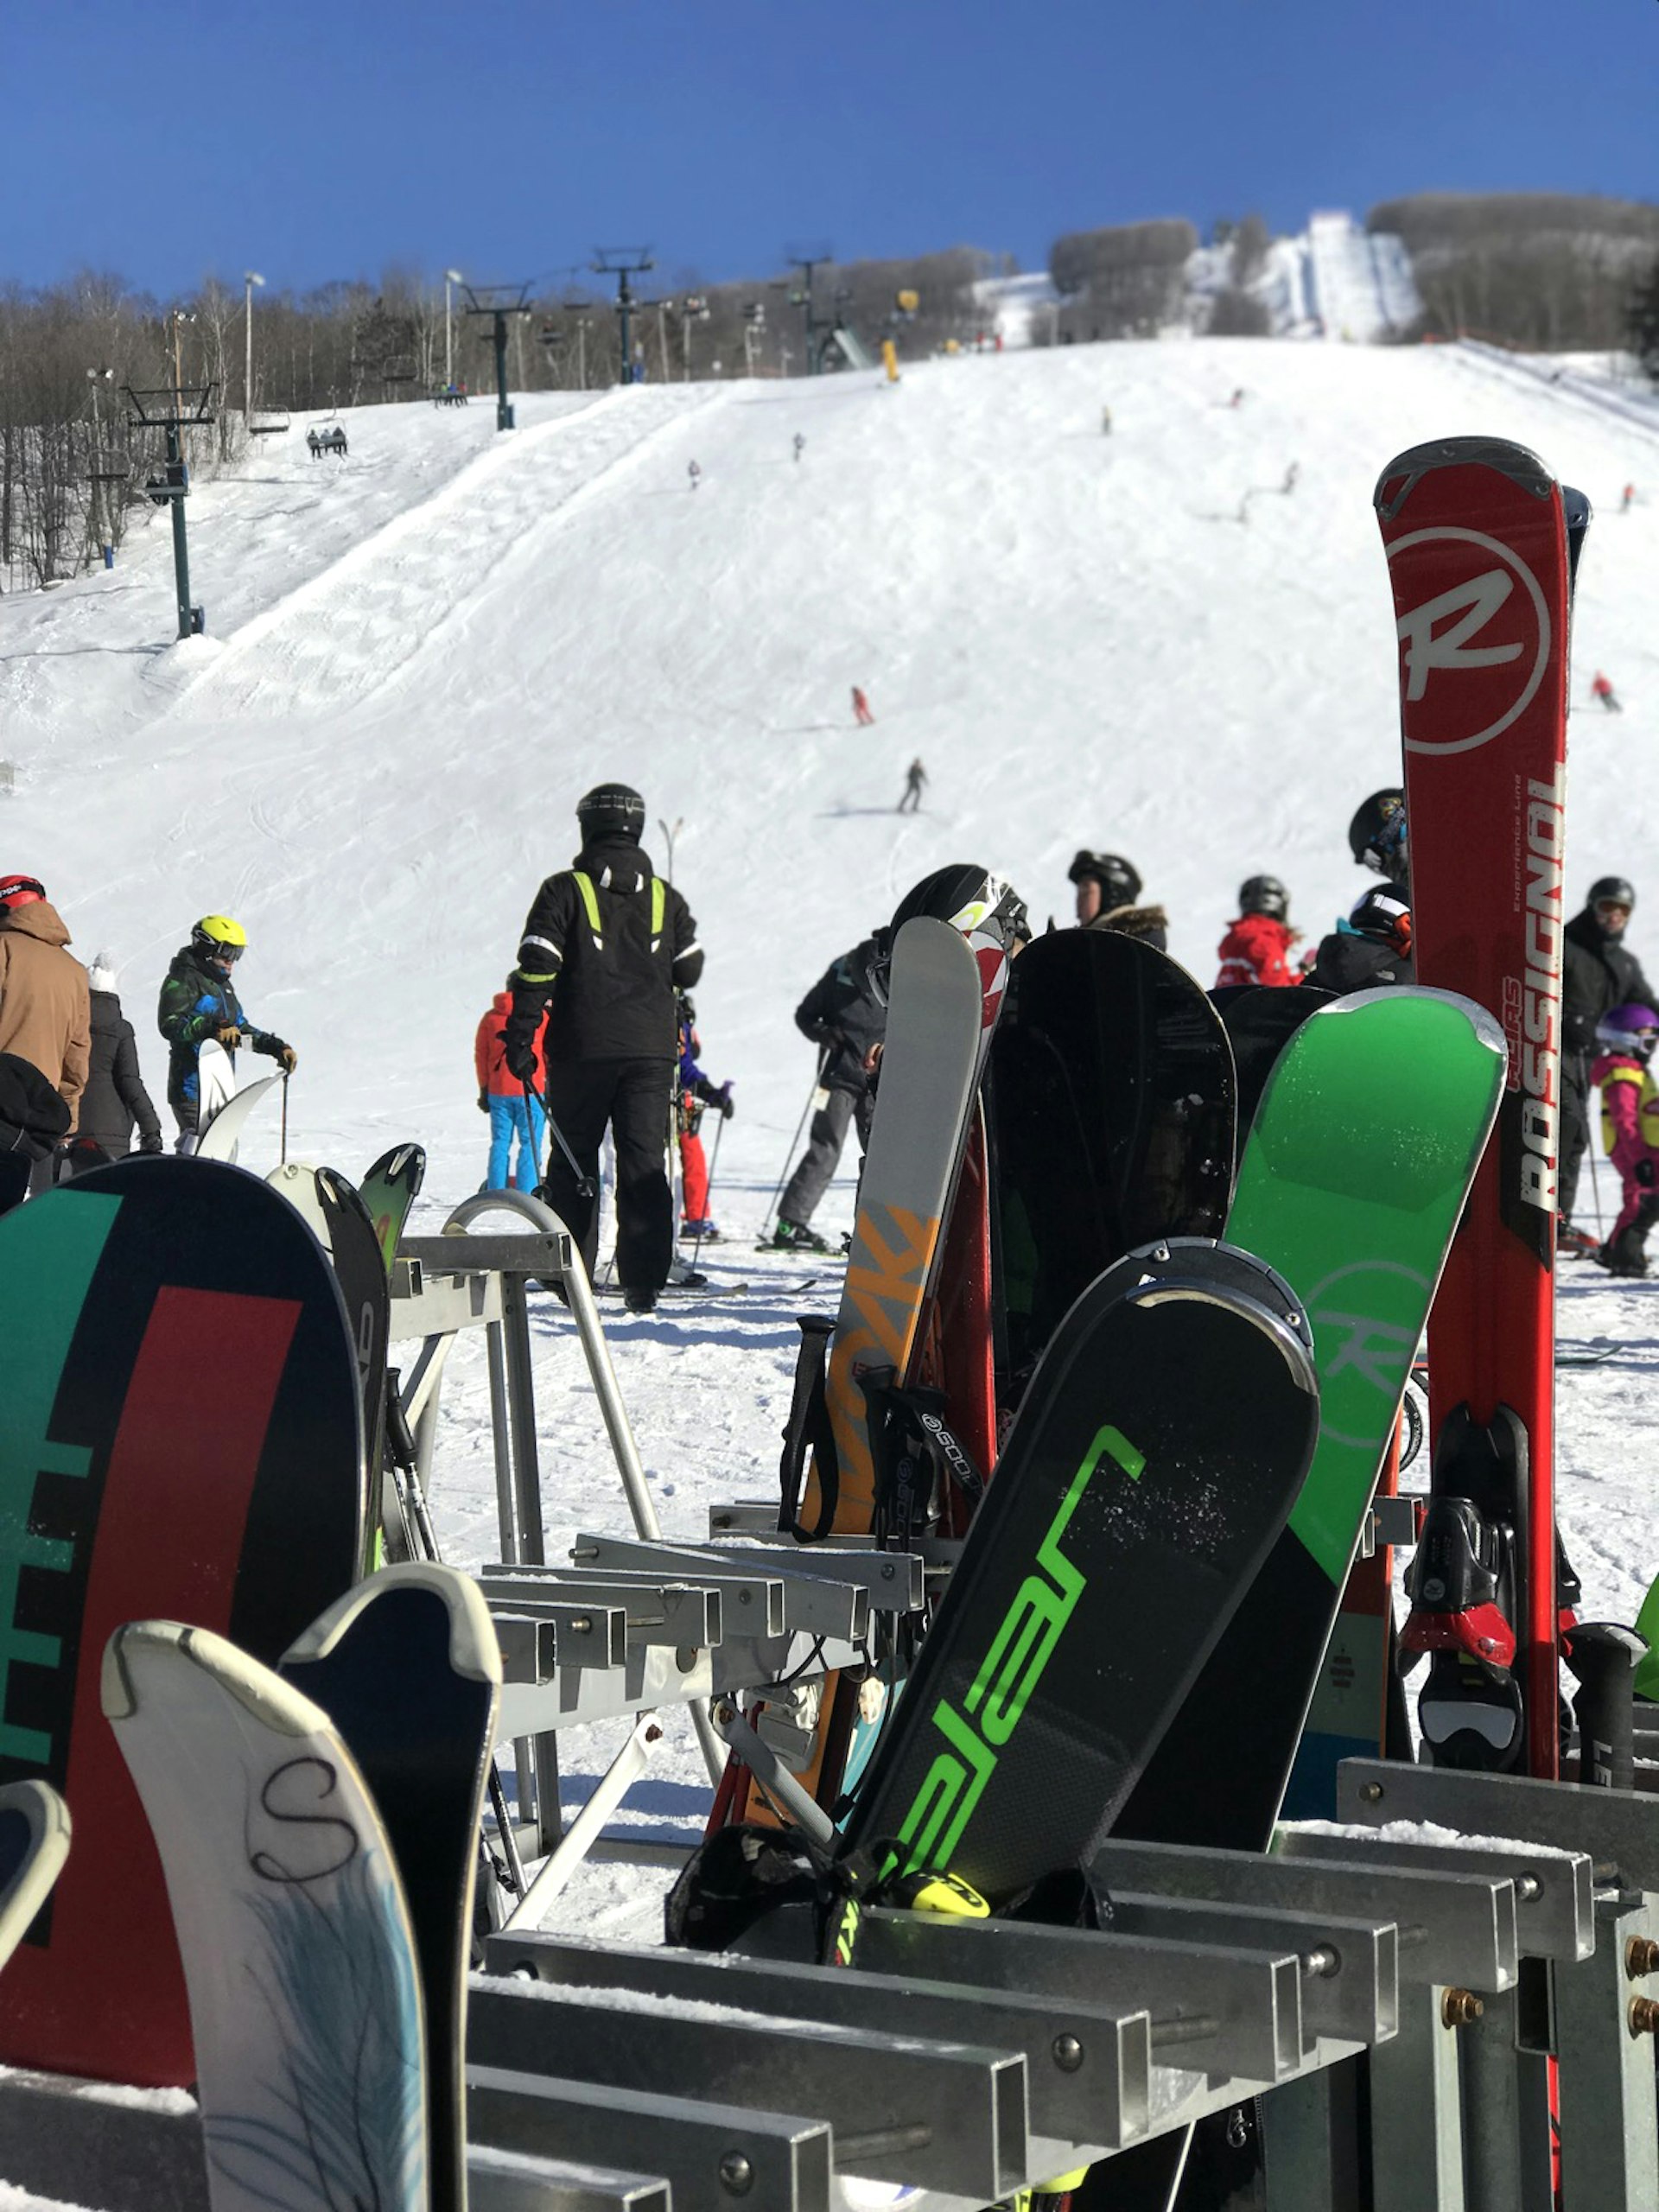 A rack of skis and snowboards are in the foreground and snow sports enthusiasts are in the background at the foot of a pristine, groomed ski slope in Mont-Tremblant, Quebec.